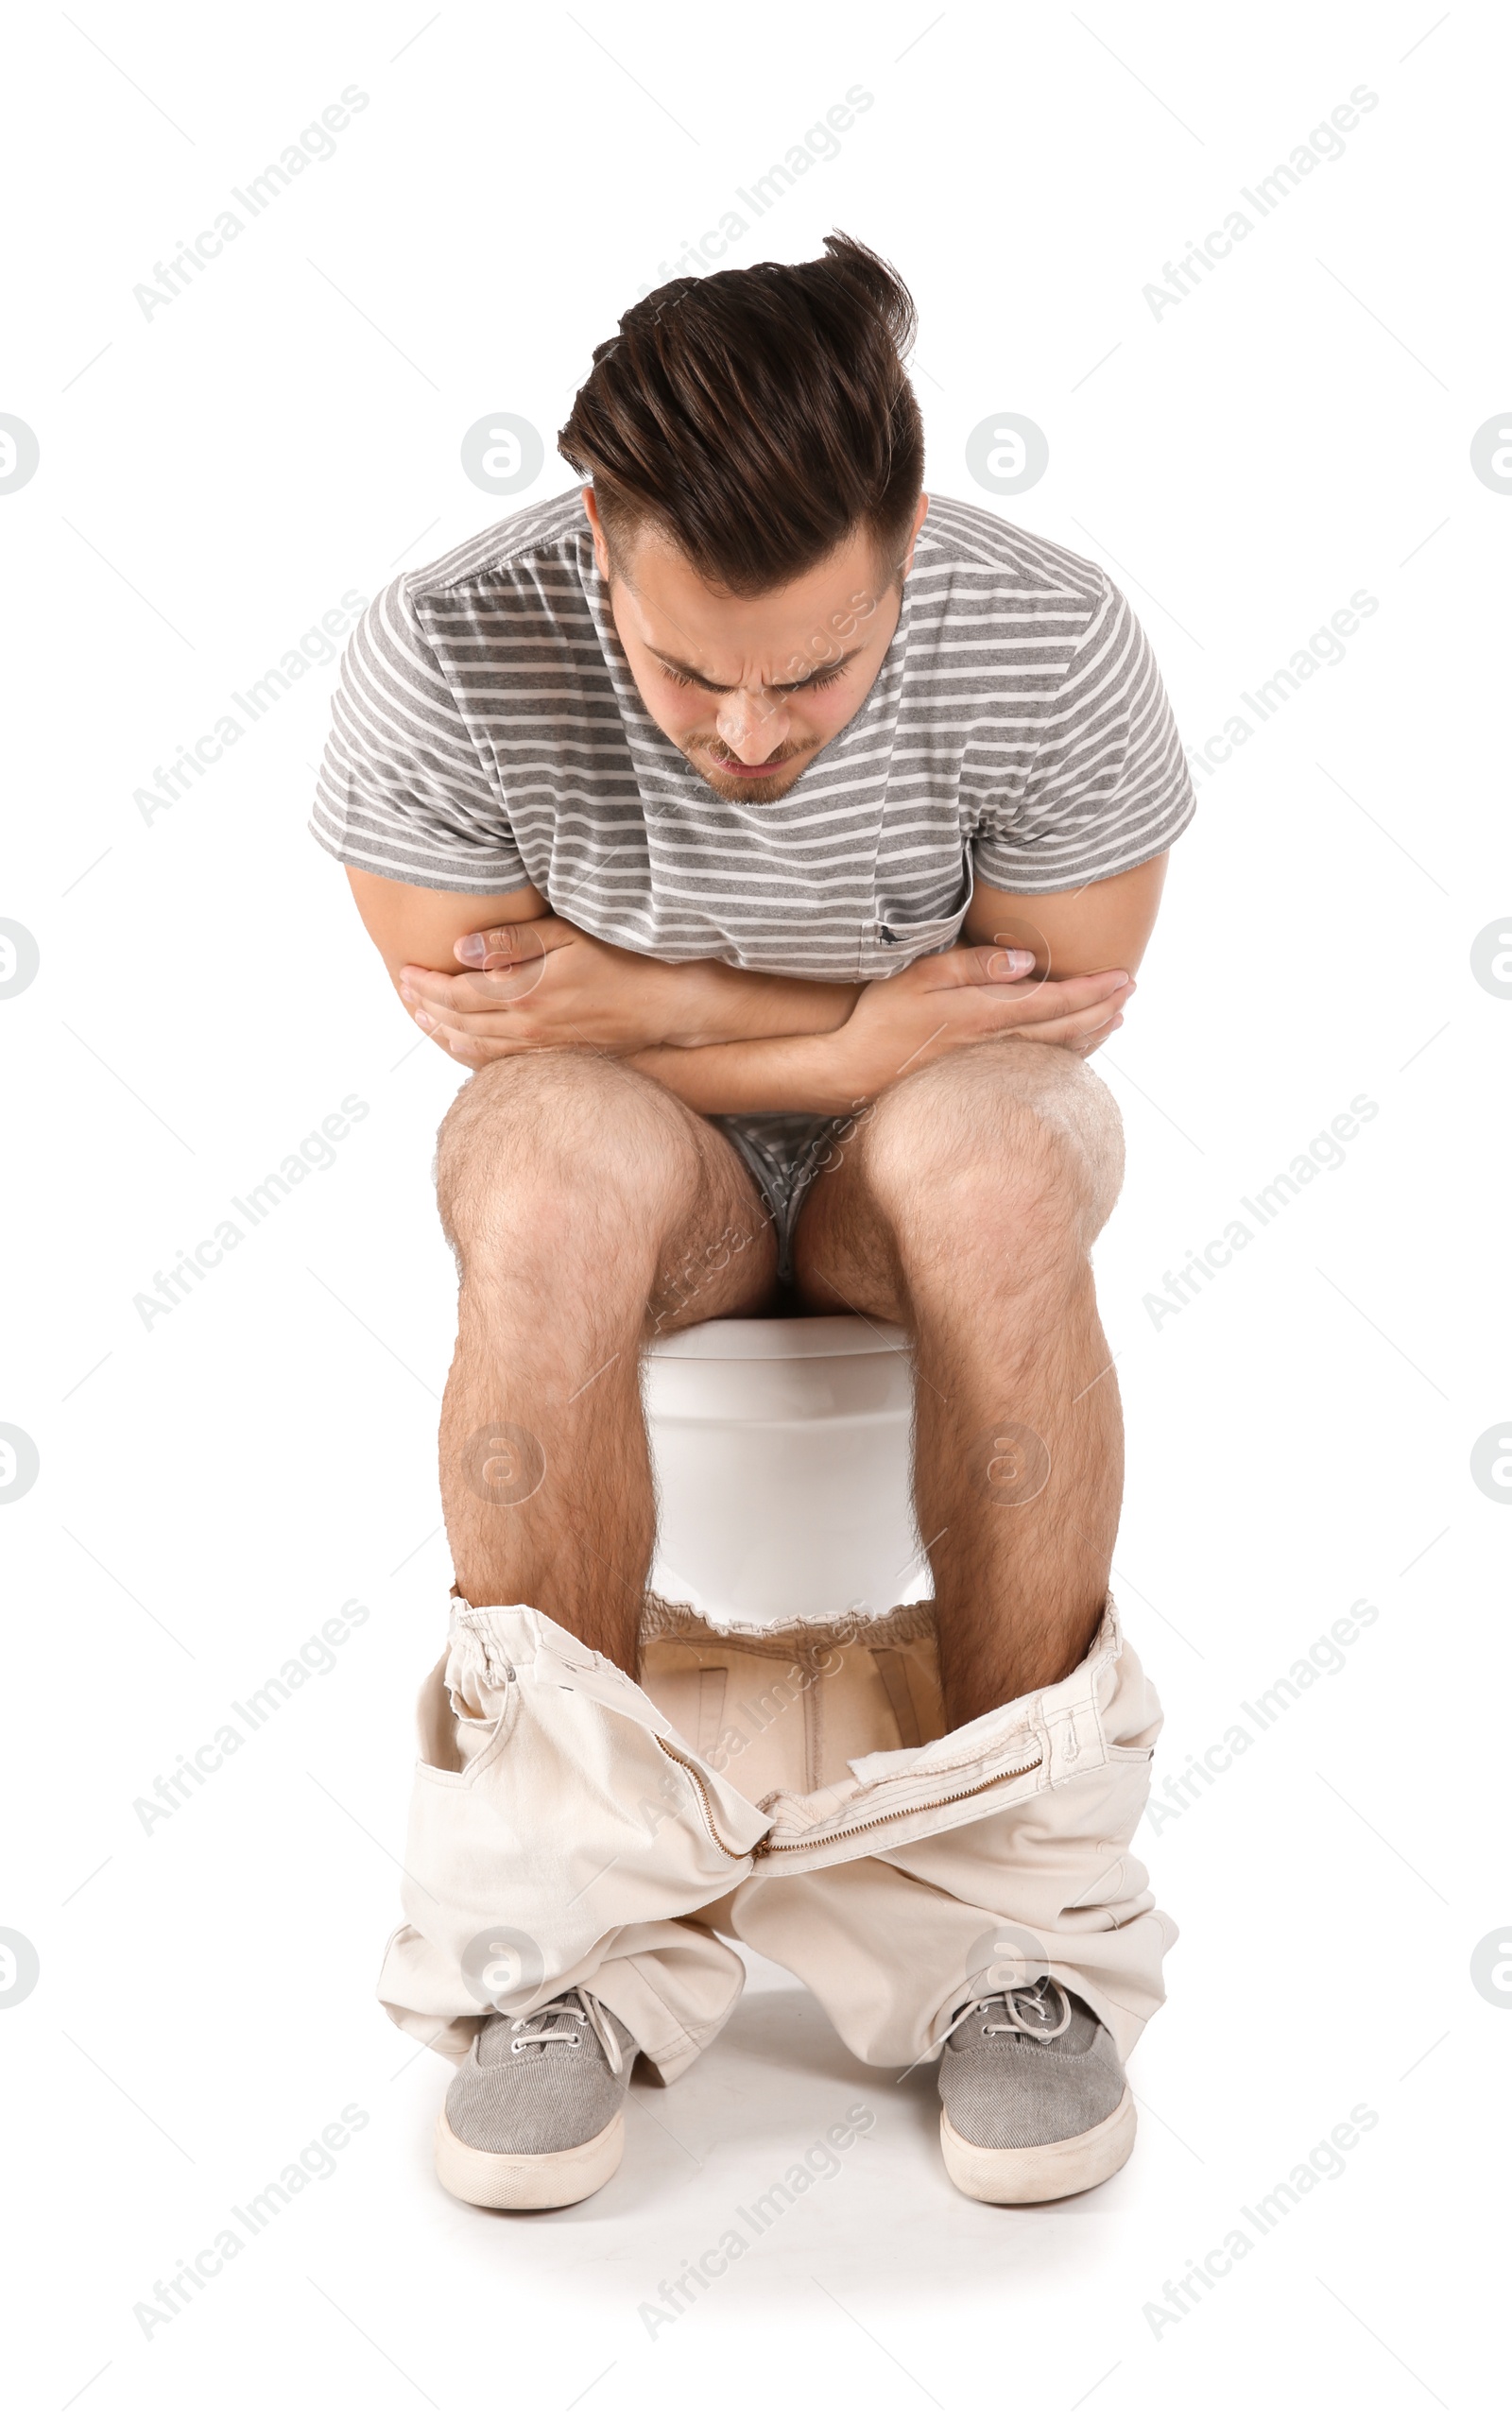 Photo of Young man suffering from diarrhea on toilet bowl. Isolated on white